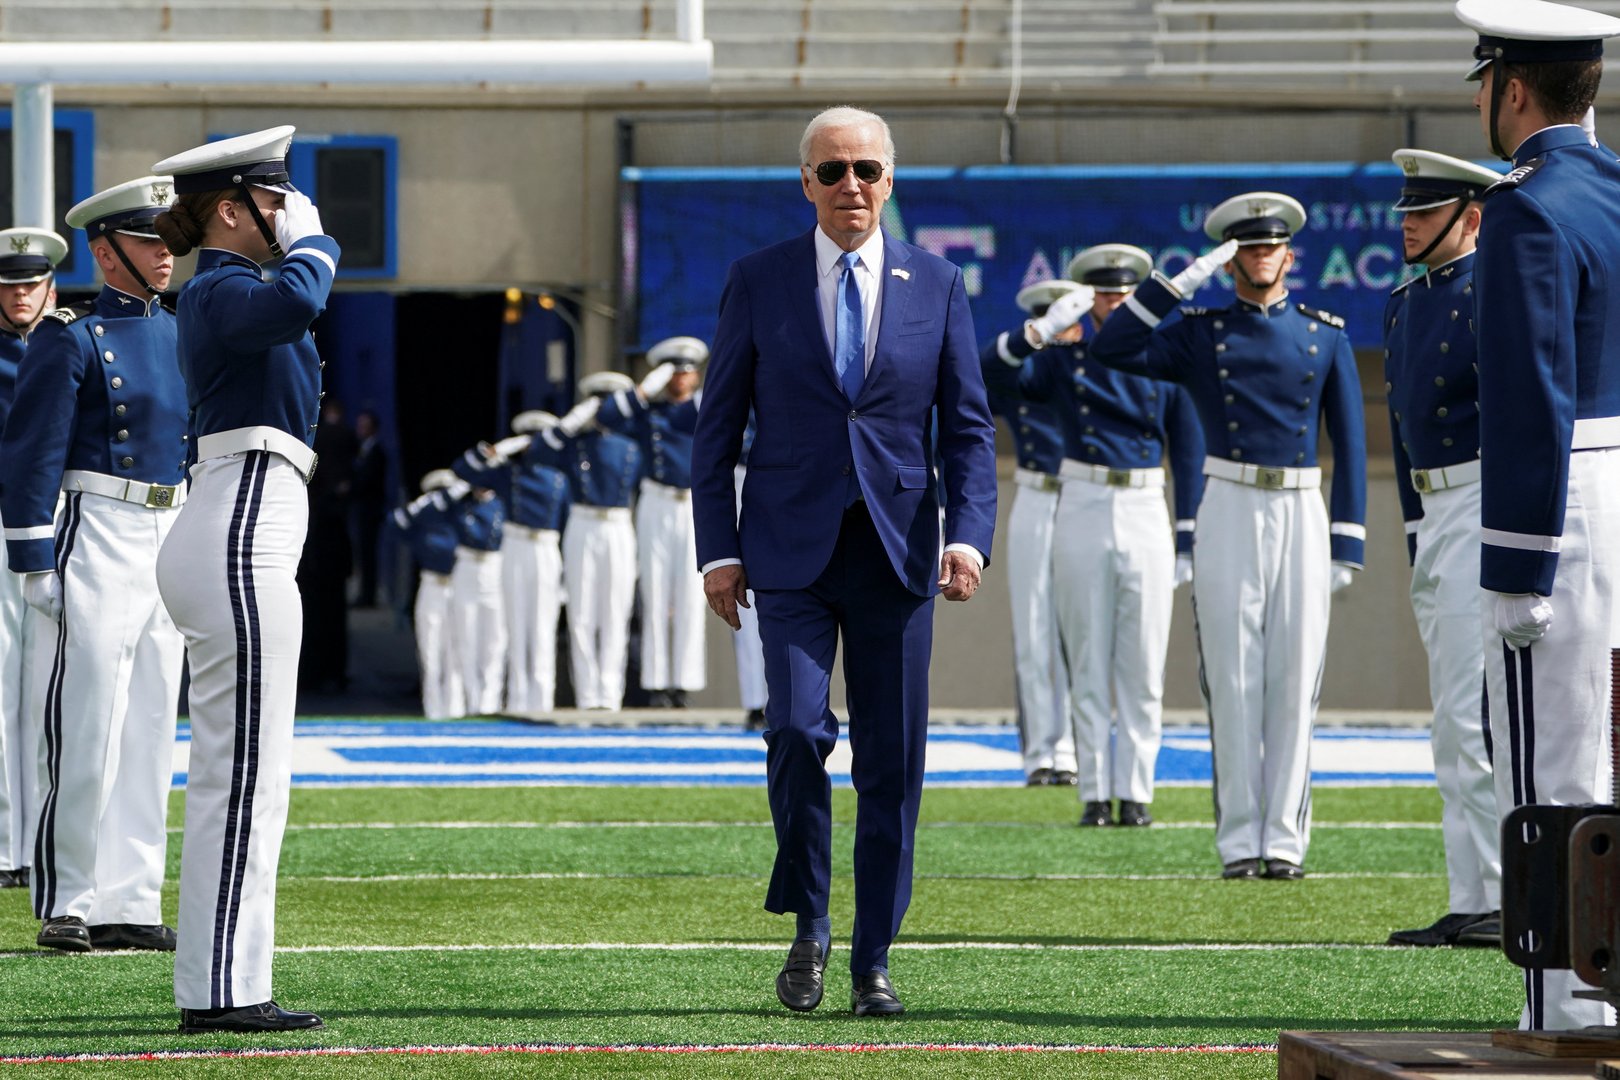 image Biden trips and falls during graduation ceremony, recovers quickly (video)